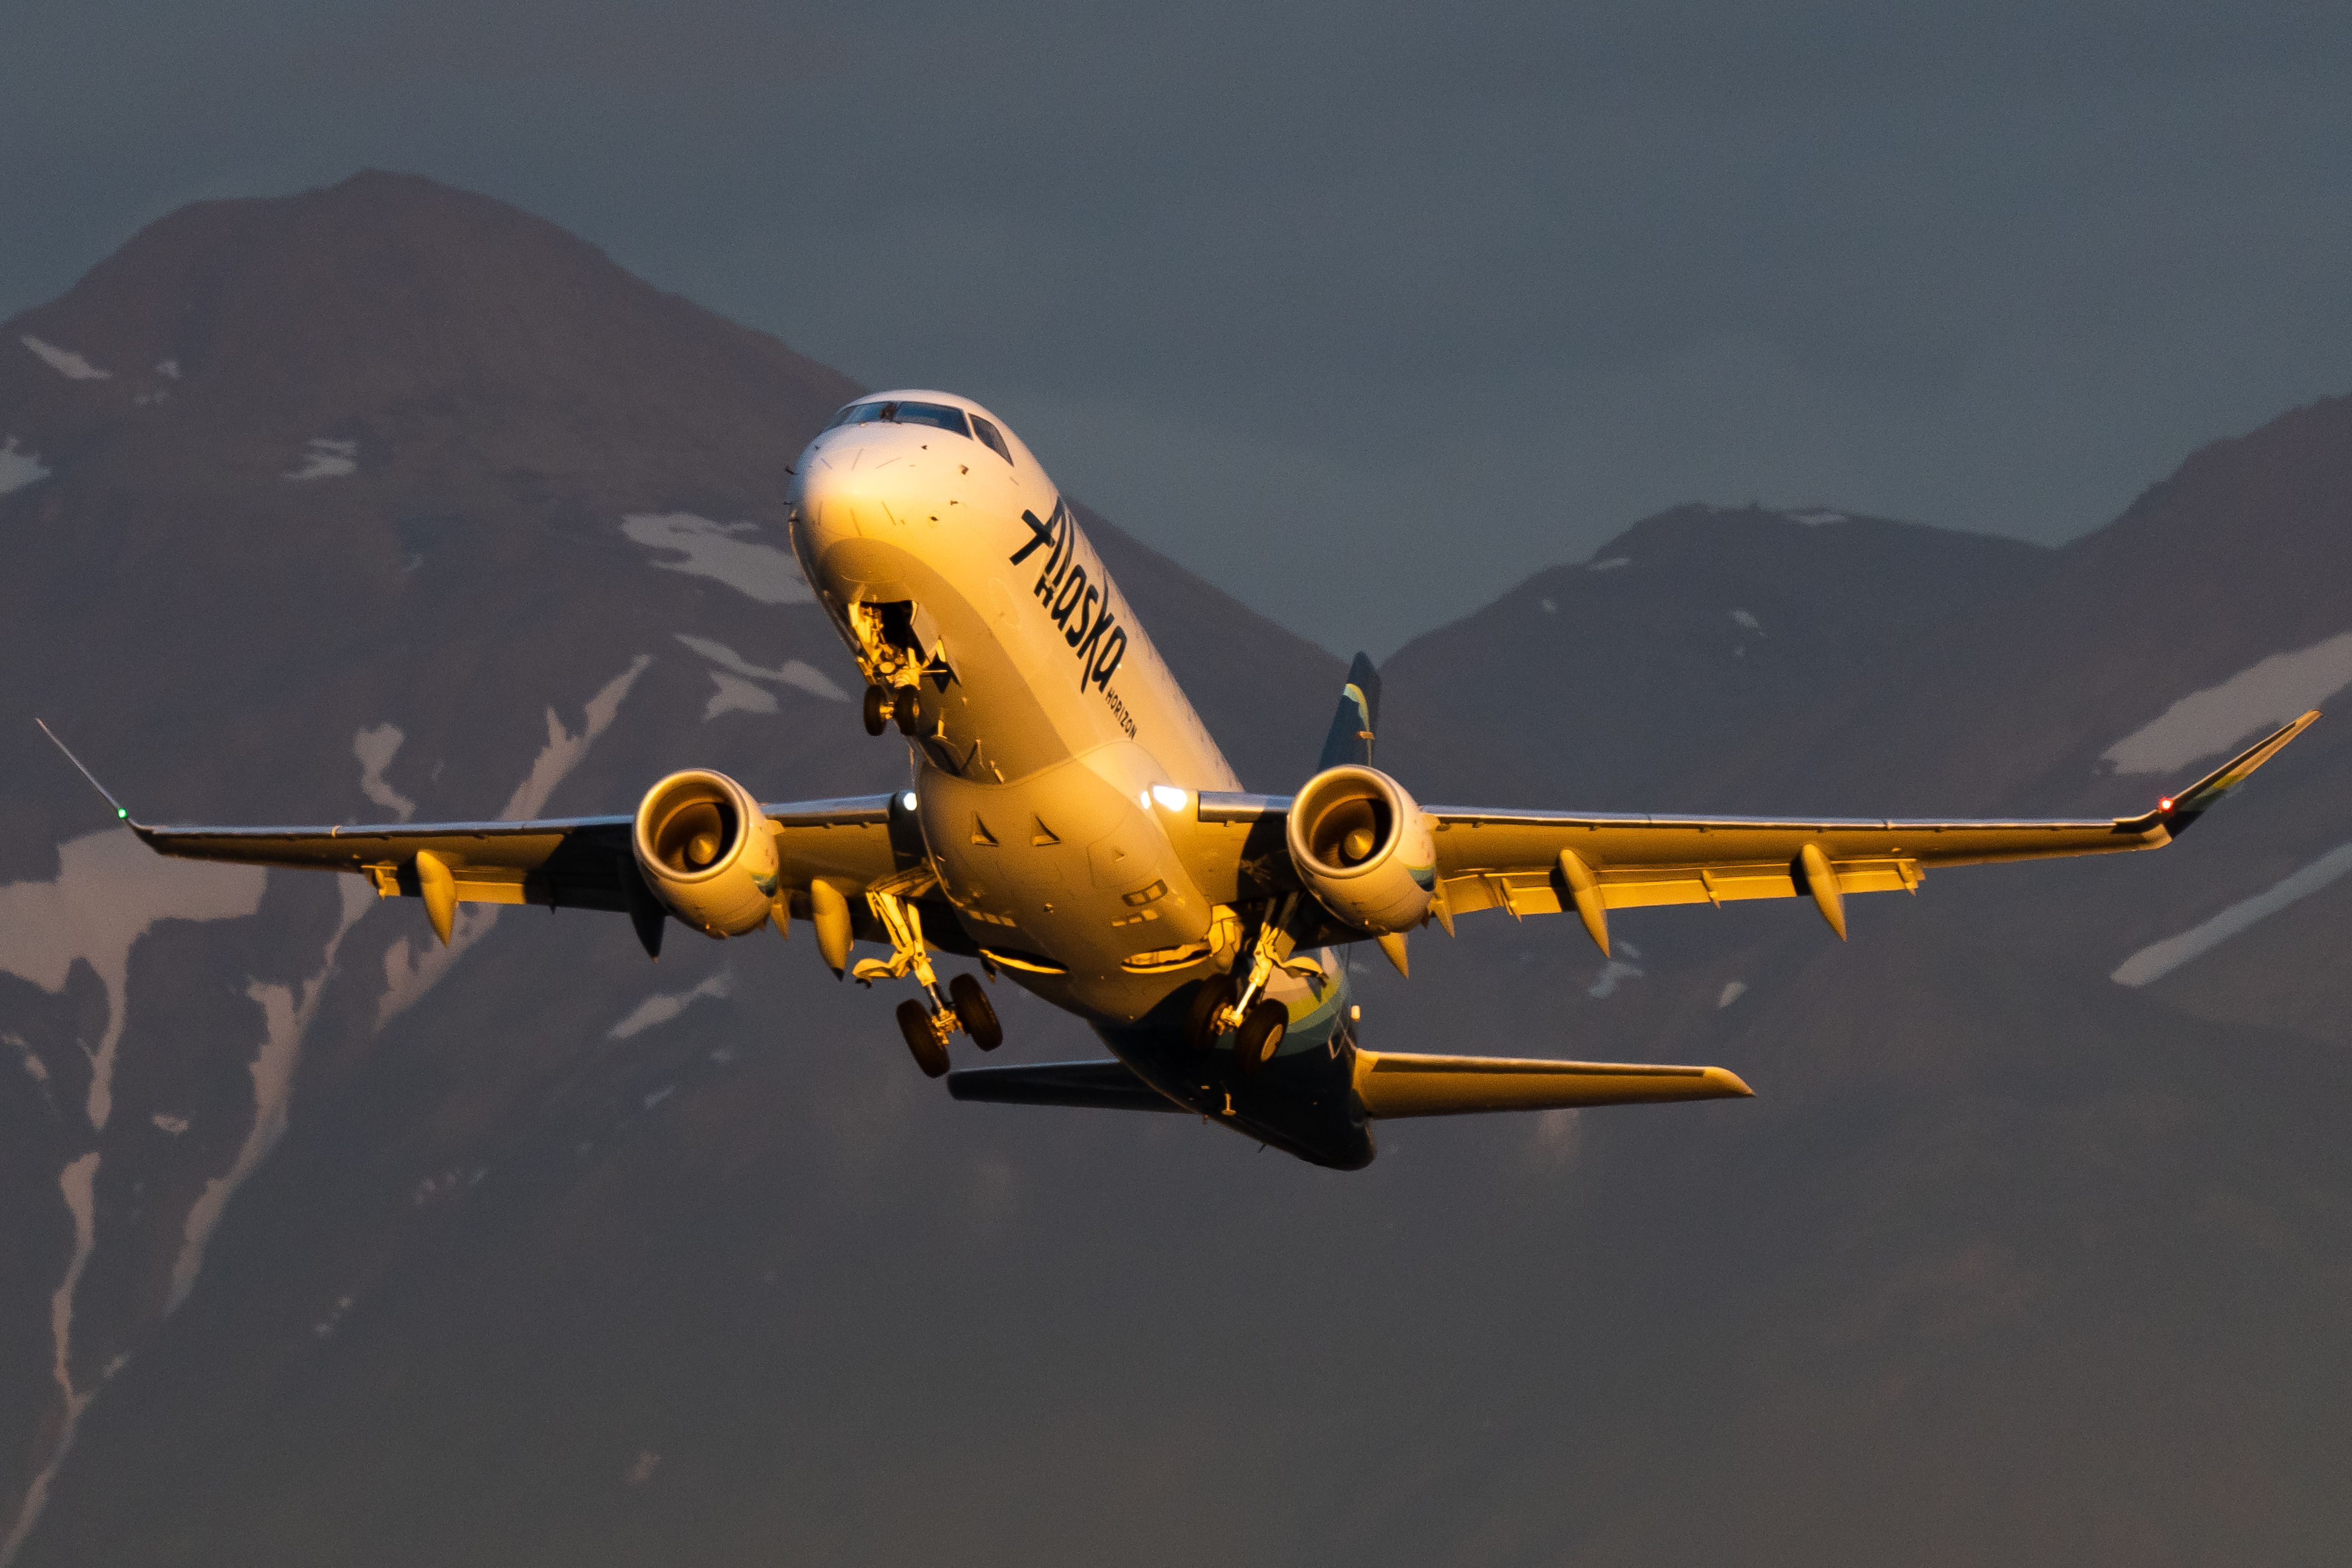 An Alaska Airlines Boeing 737-790 climbing with mountains in the background.